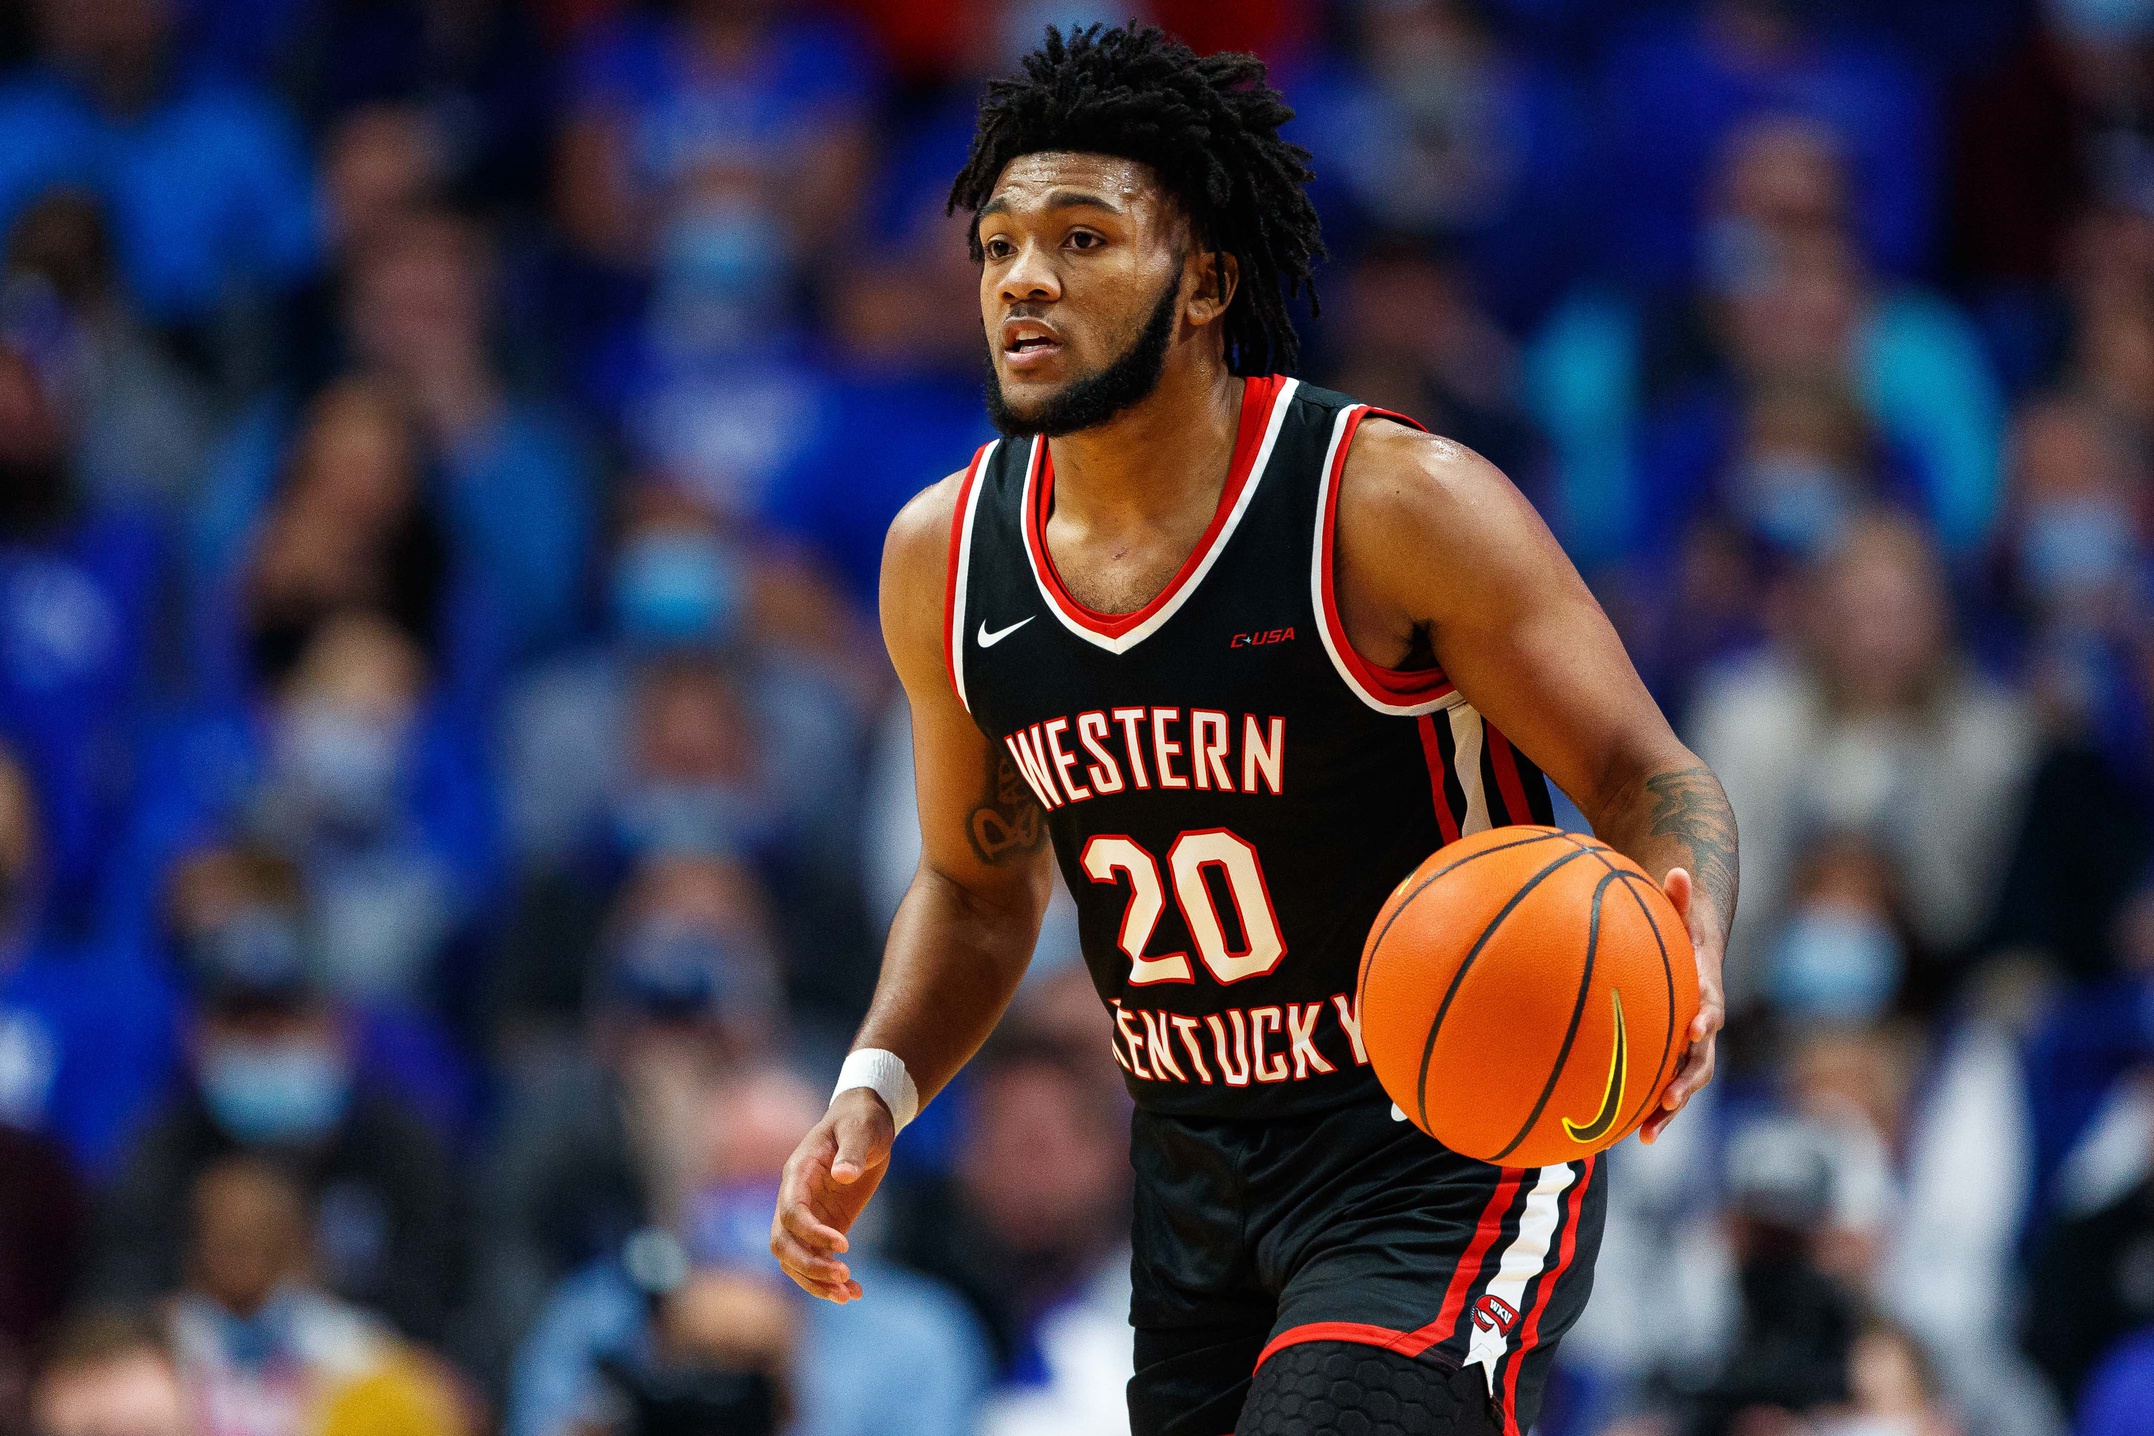 Western Kentucky Hilltoppers vs FIU Panthers Prediction, 1/26/2023 College Basketball Picks, Best Bets & Odds